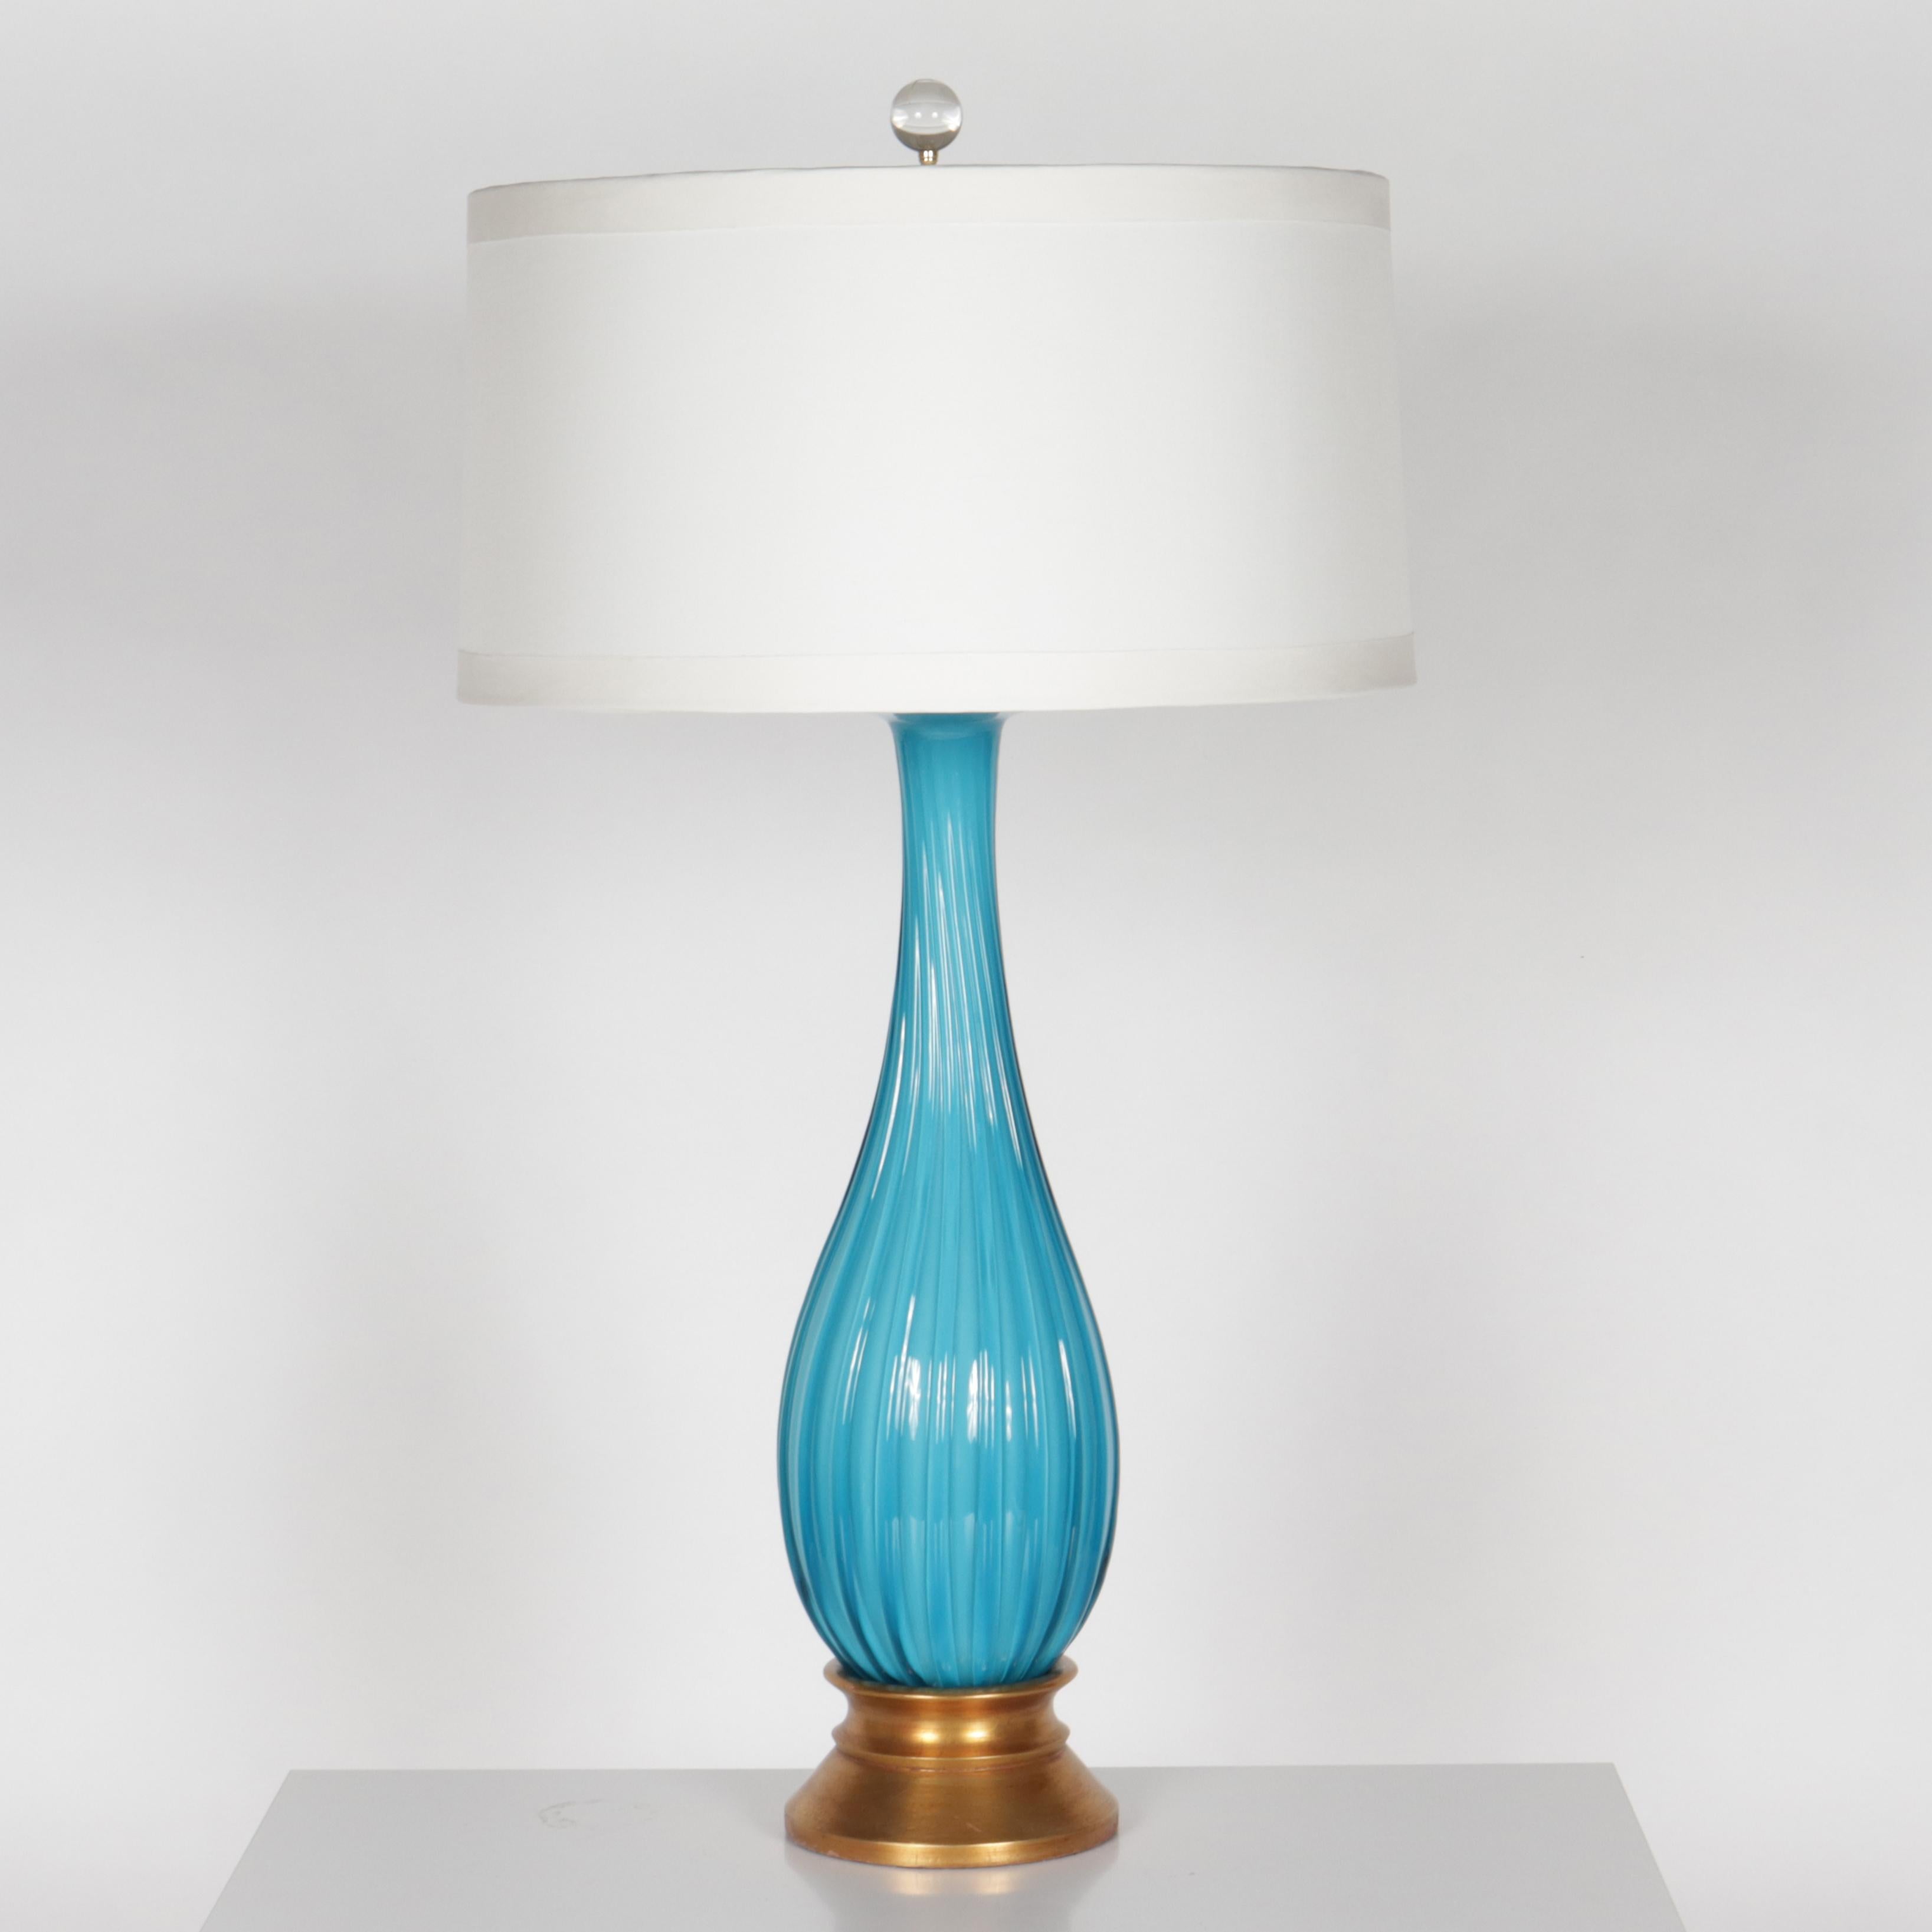 Blue Murano glass lamp attributed to Hollywood Regency, c. 1950.